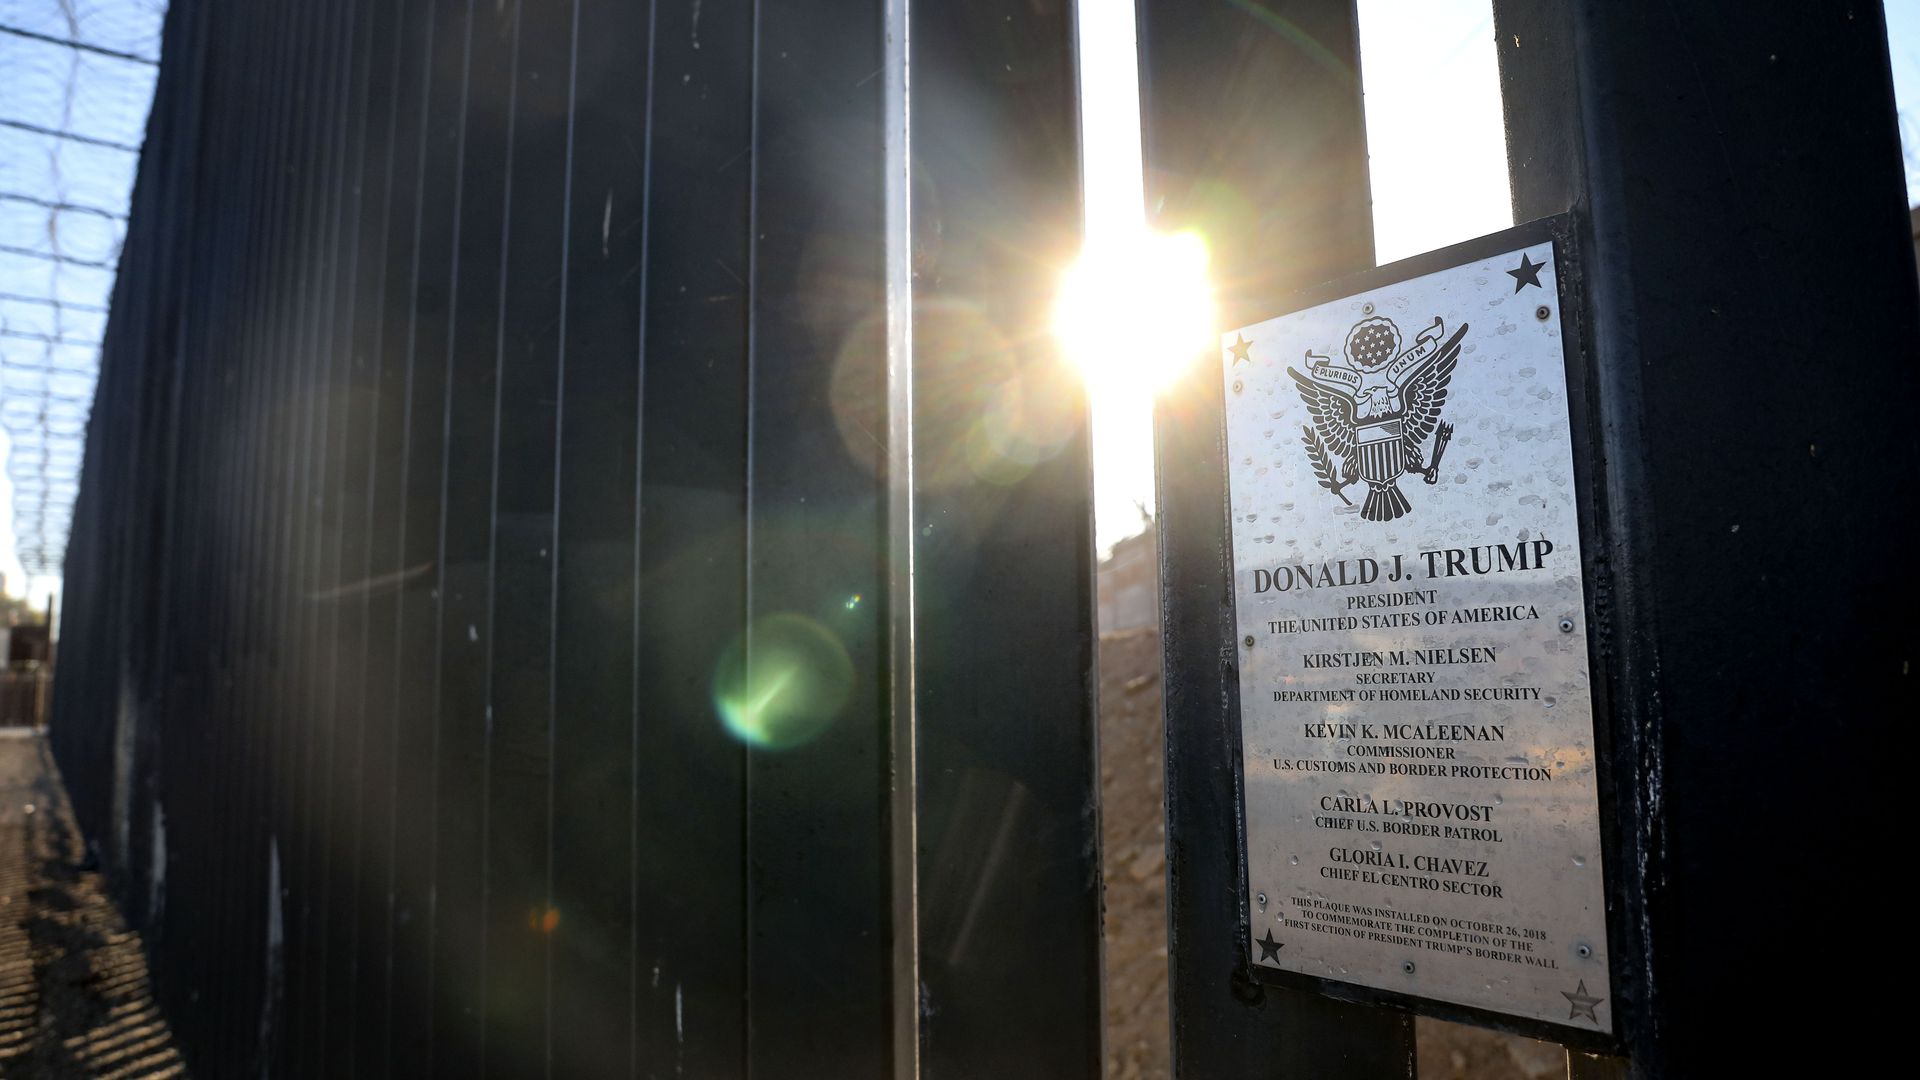 A plaque commemorating President Donald Trumps hangs on the United States-Mexico border wall.